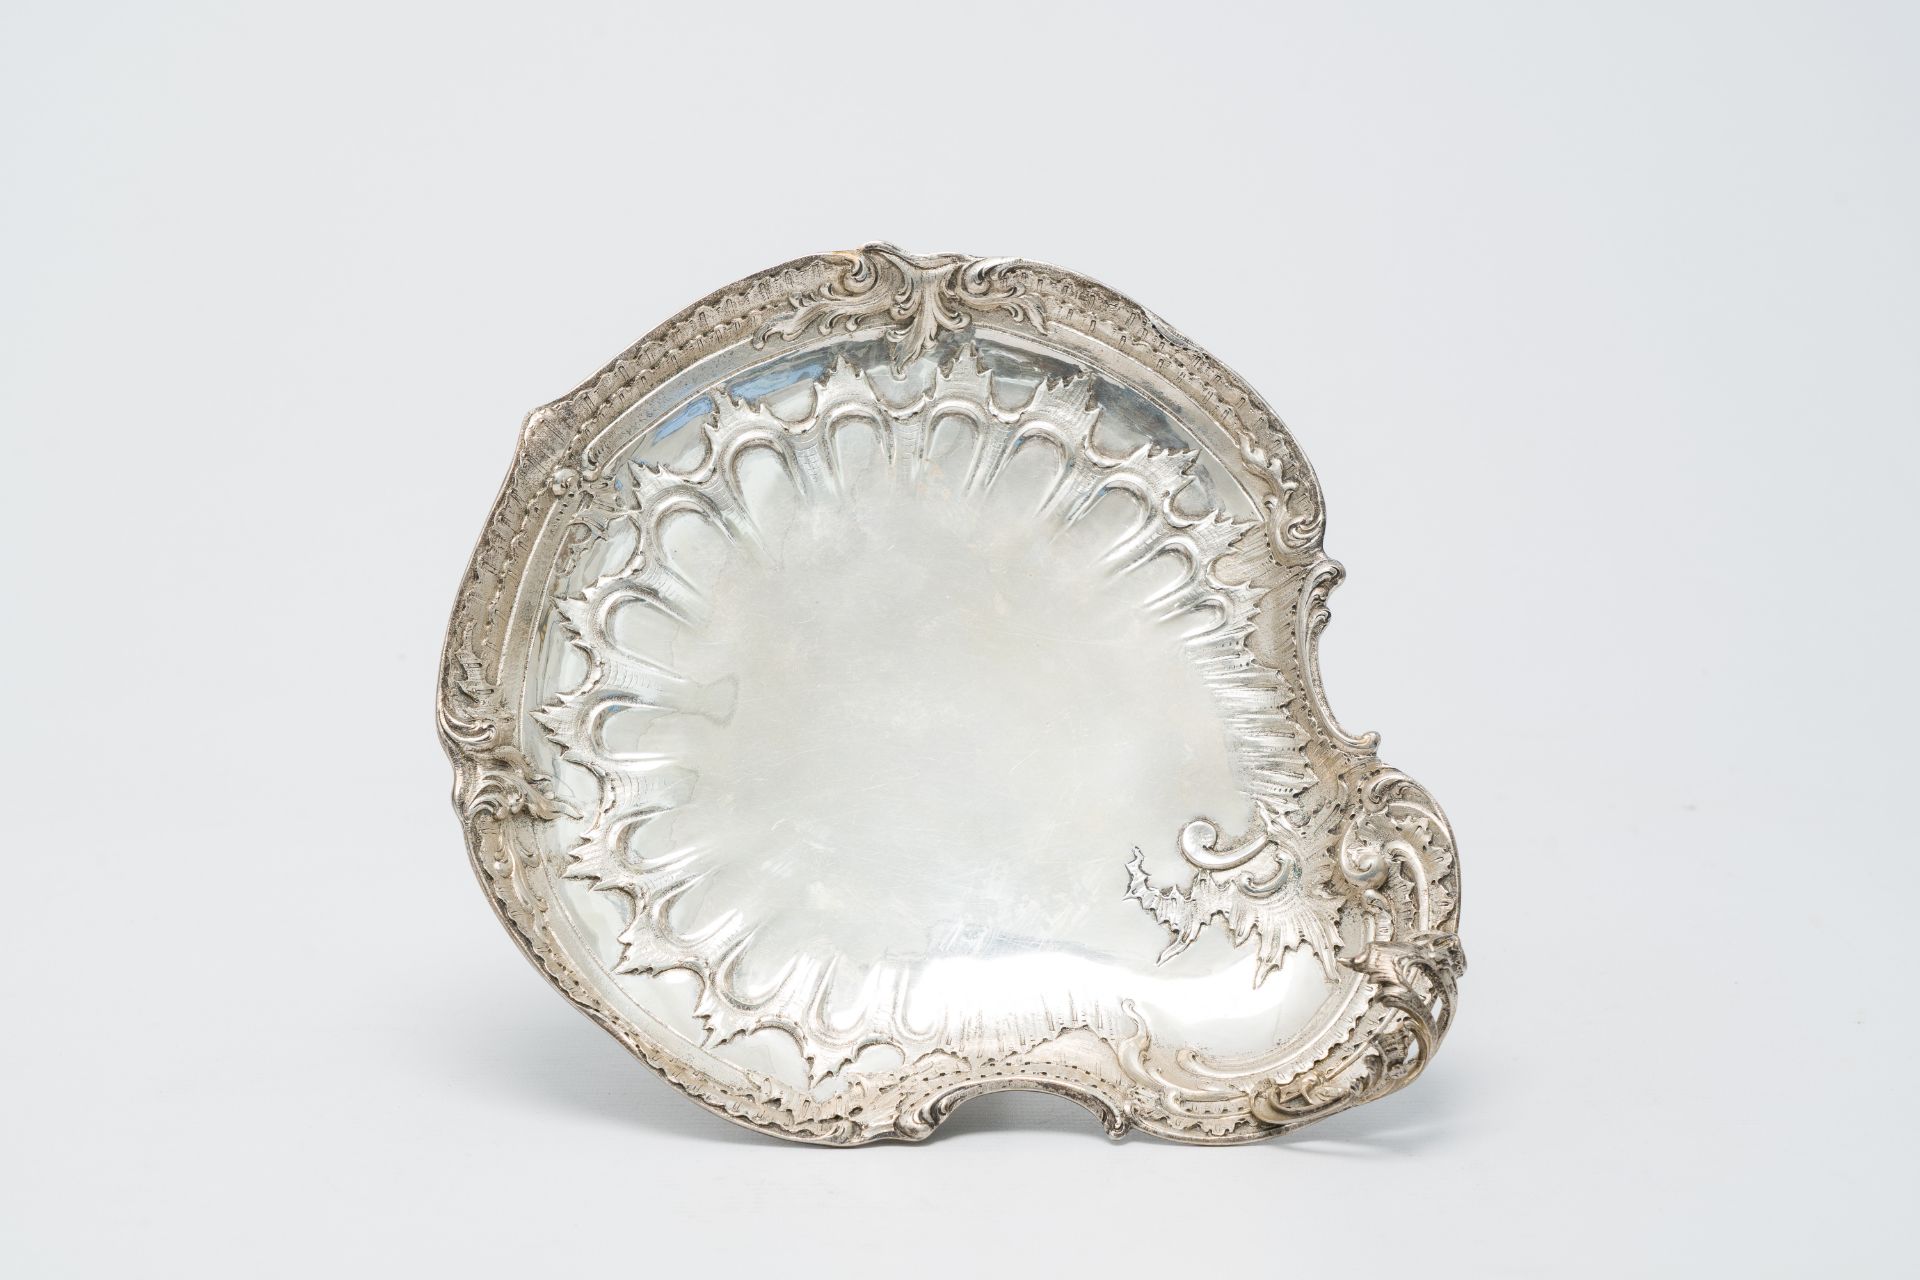 A Belgian shell-shaped silver Louis XV style dish on foot, maker's mark Wolfers, 800/000, Brussels, - Image 7 of 9